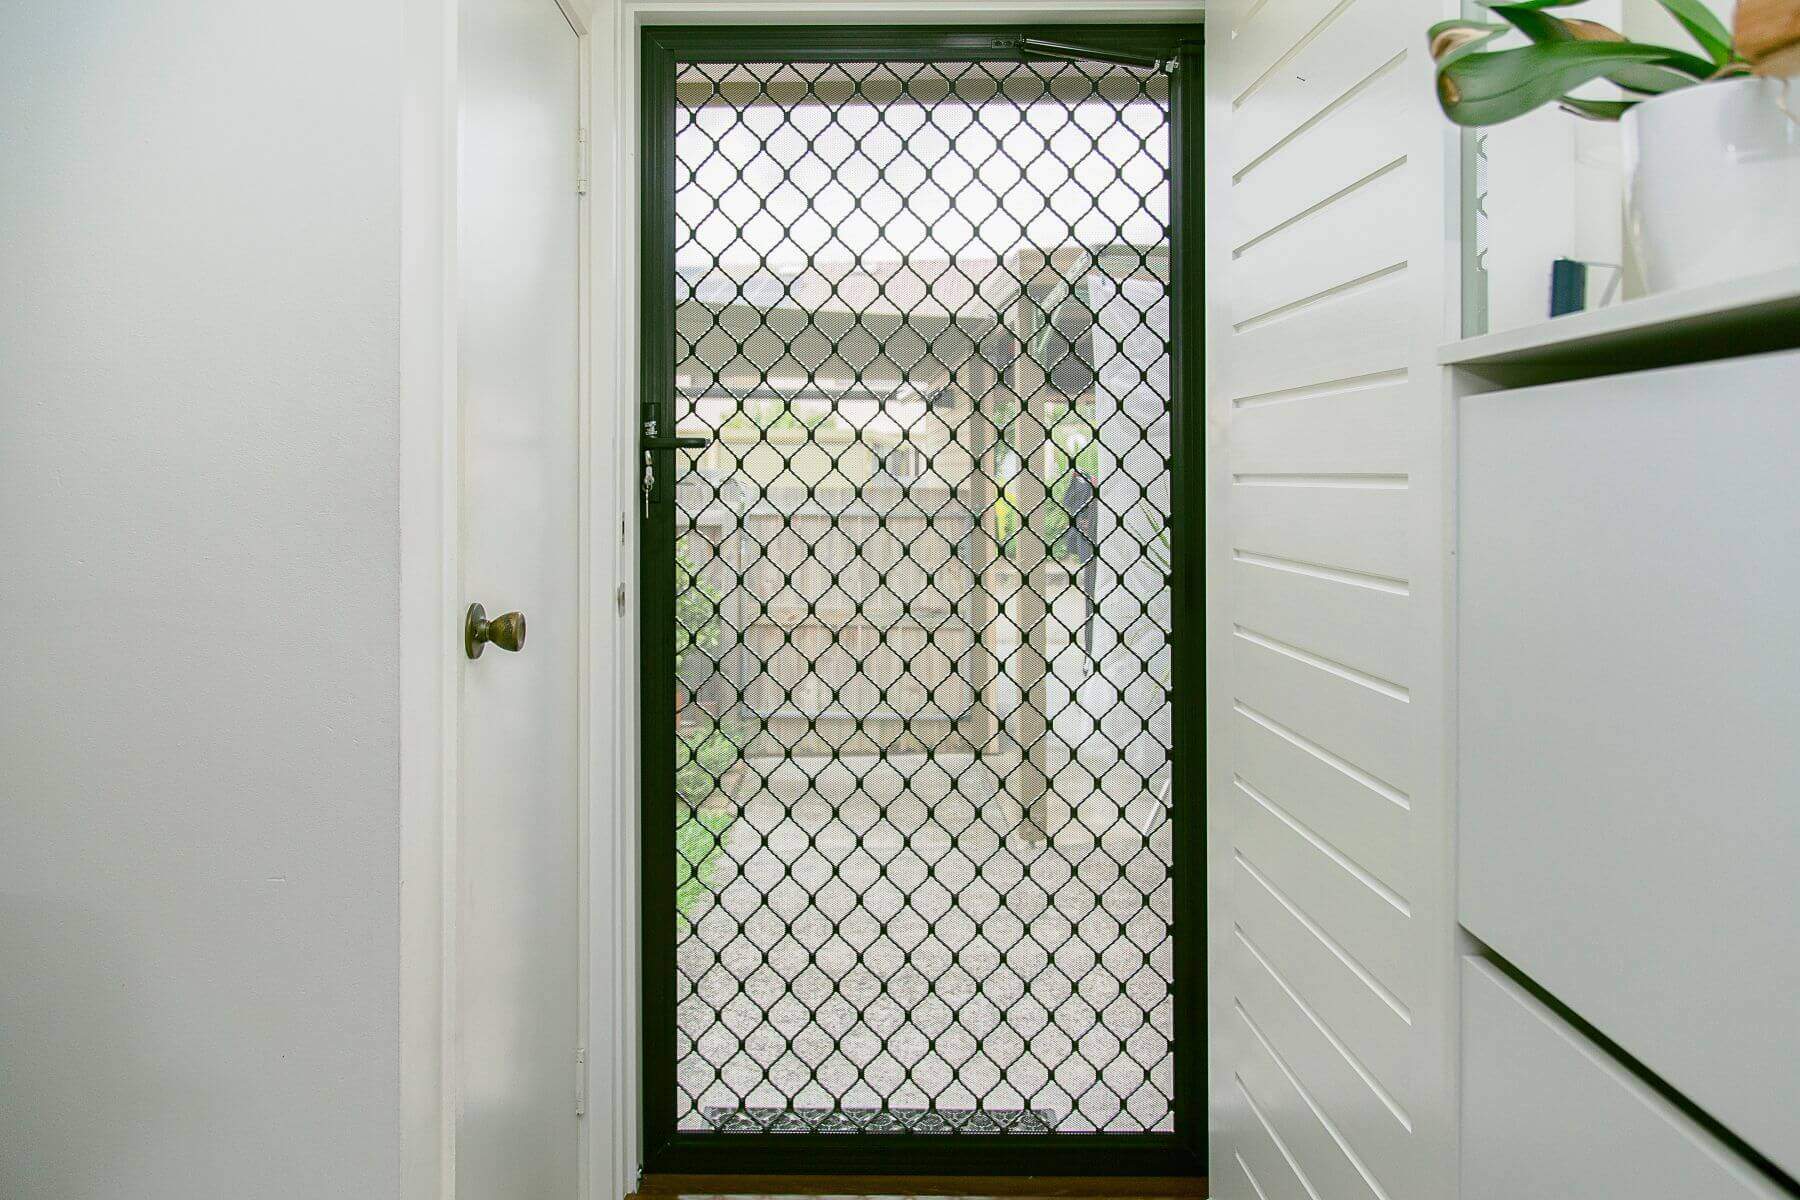 Doors Plus-External-Entrance-Nubreeze-Safety screen door-with grill design on it-in black finish